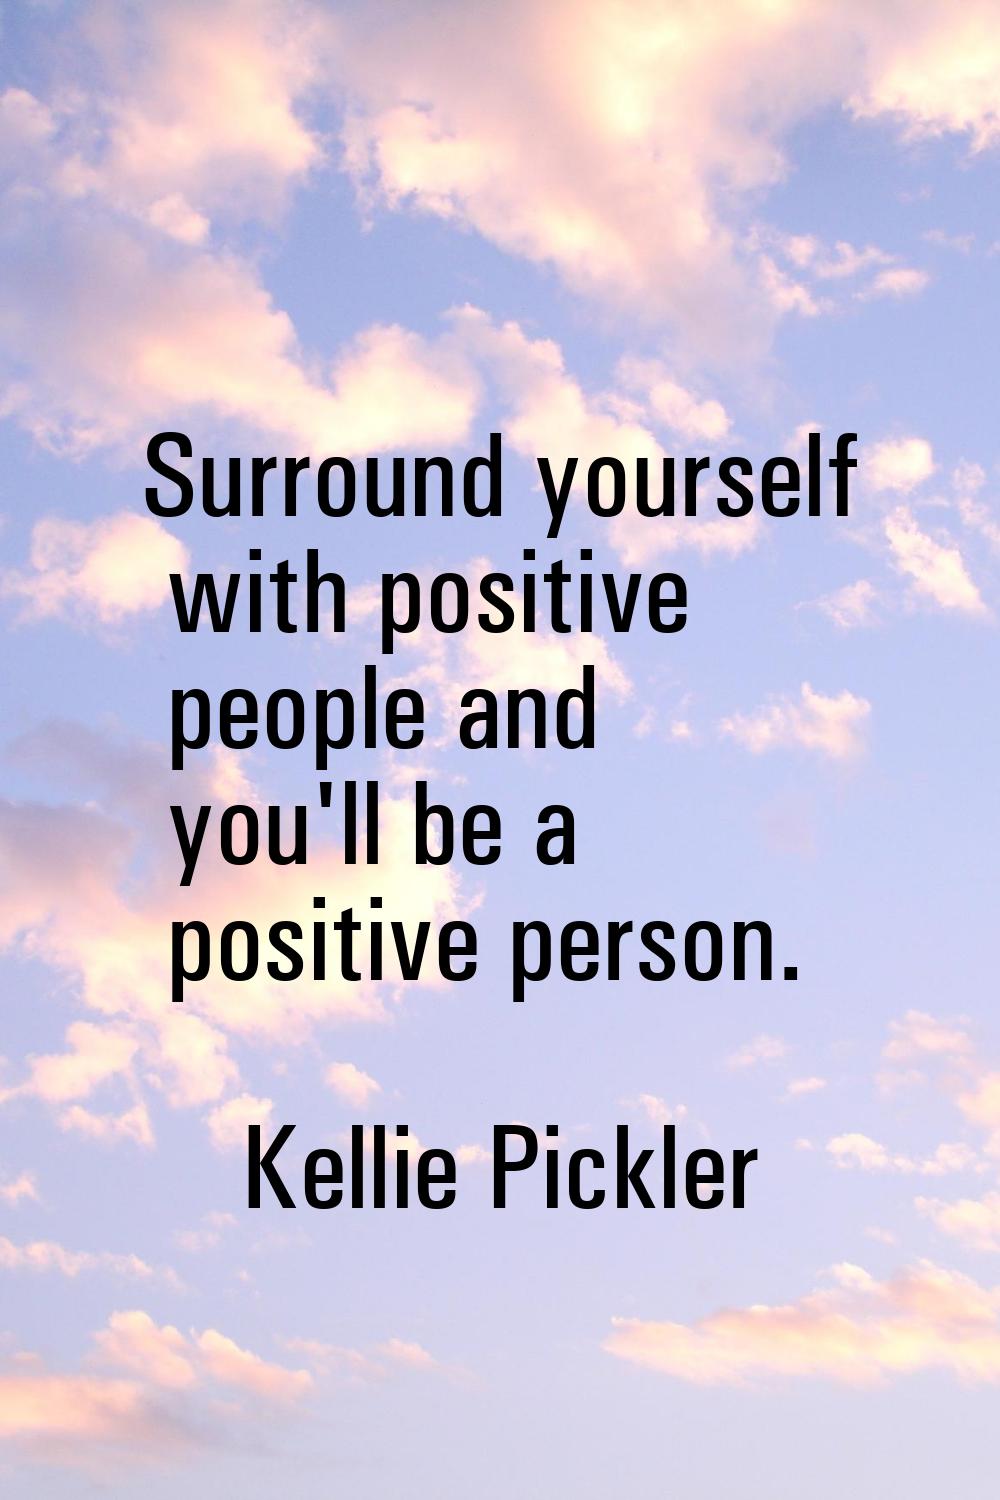 Surround yourself with positive people and you'll be a positive person.